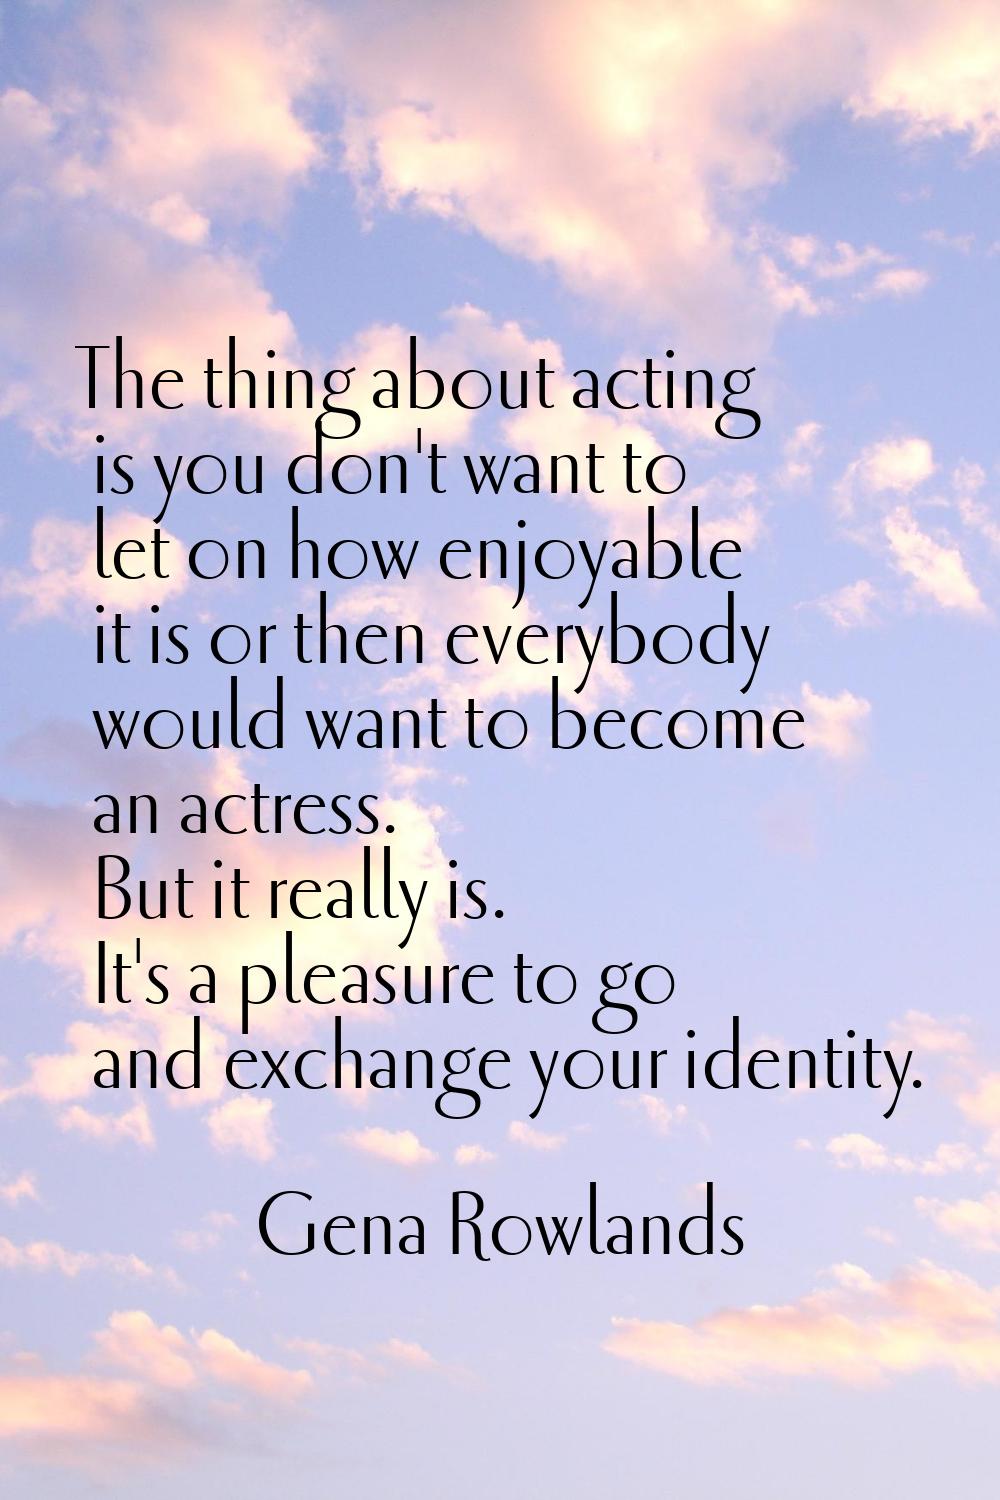 The thing about acting is you don't want to let on how enjoyable it is or then everybody would want